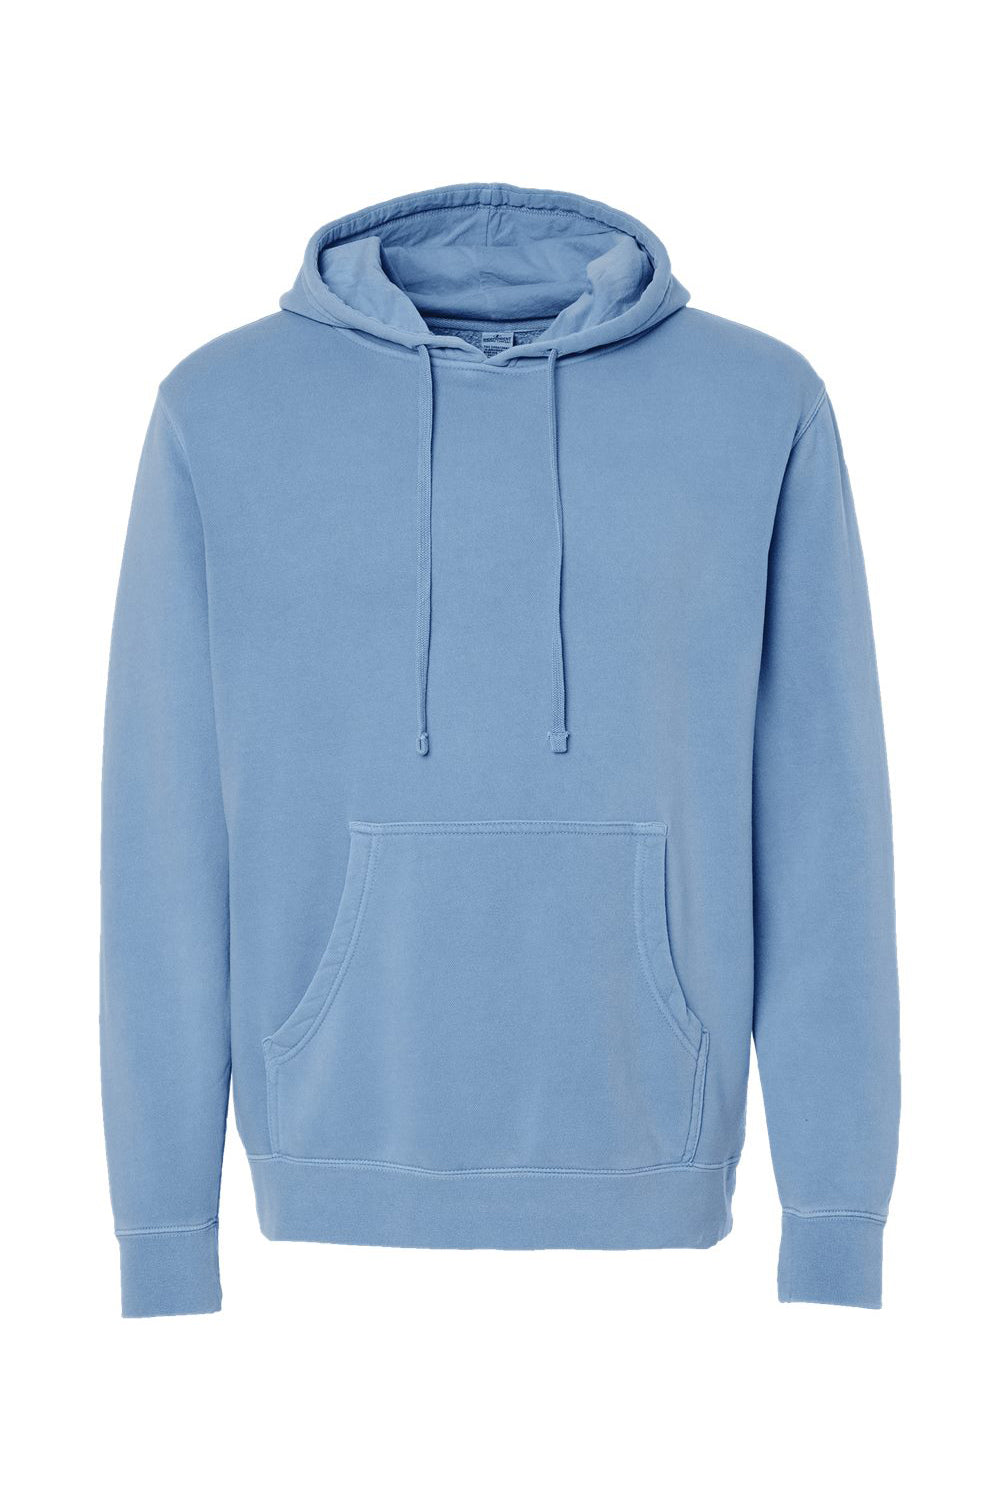 Independent Trading Co. PRM4500 Mens Pigment Dyed Hooded Sweatshirt Hoodie Light Blue Flat Front